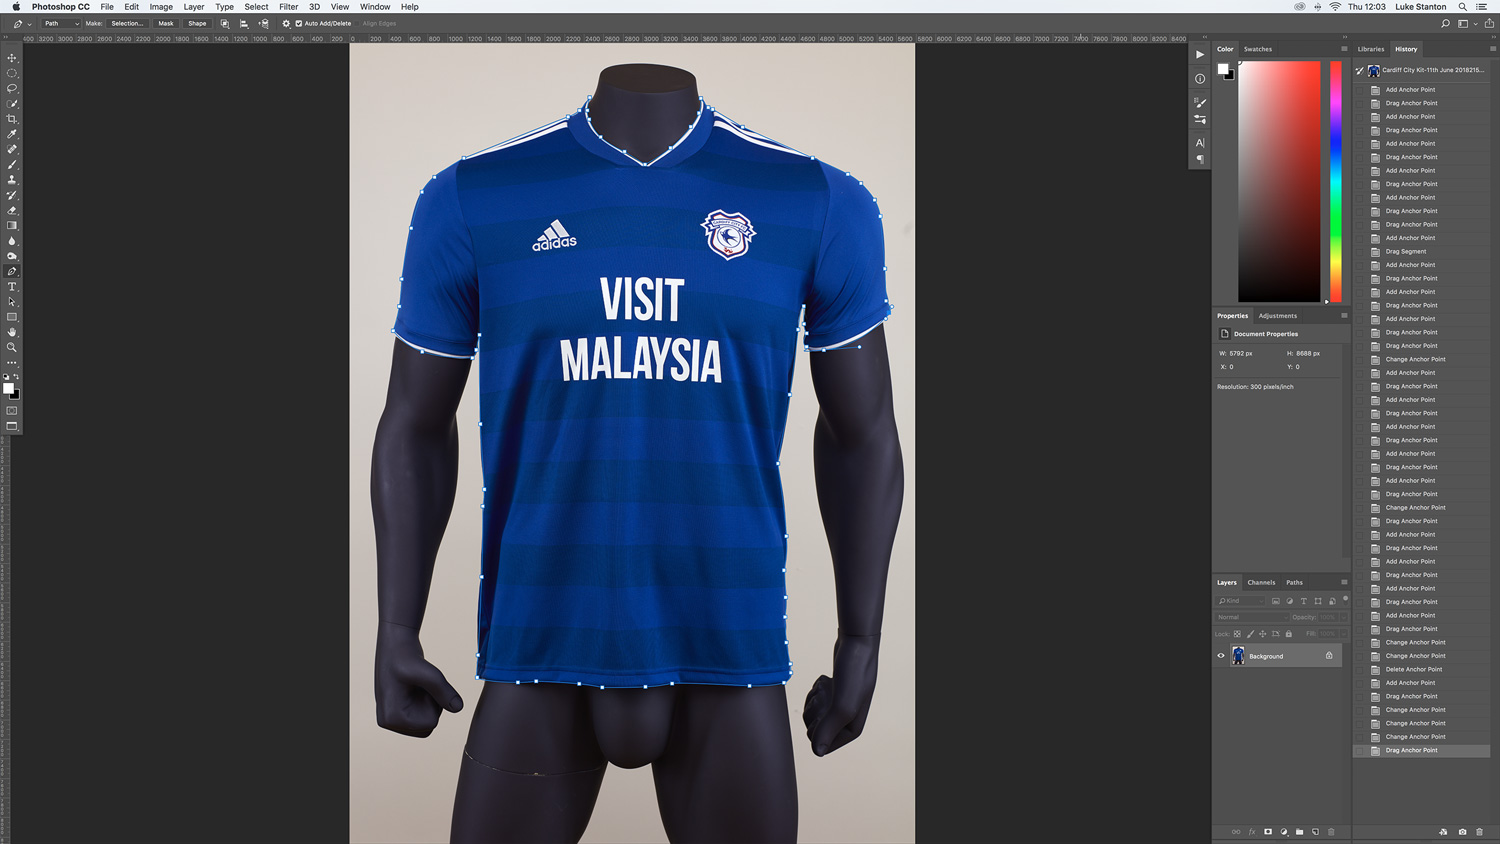 Photo Editing for Cardiff City Football Product Photography (1)